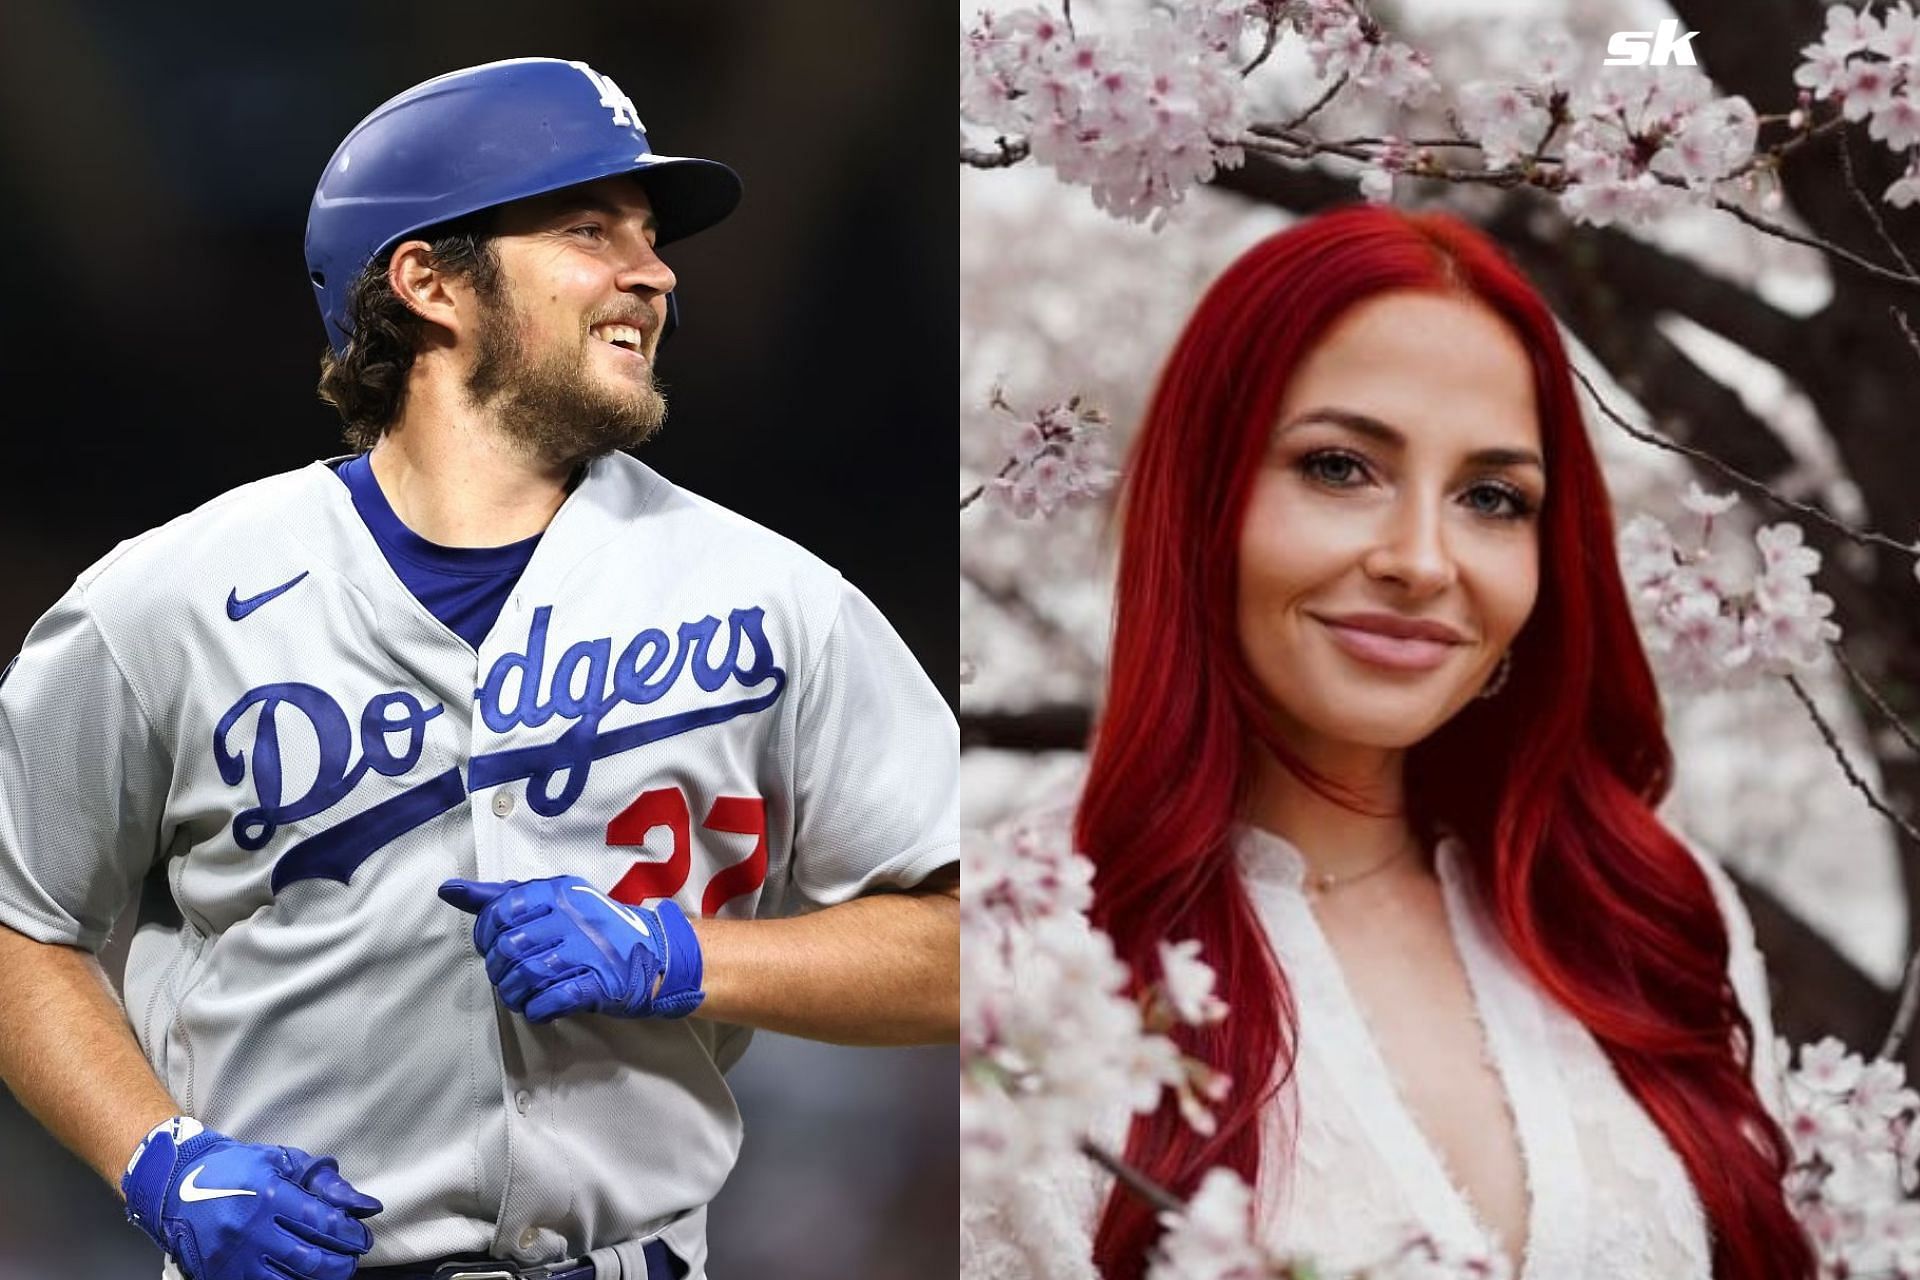 Fans astonished after images of Trevor Bauer and agent Rachel Luba surface